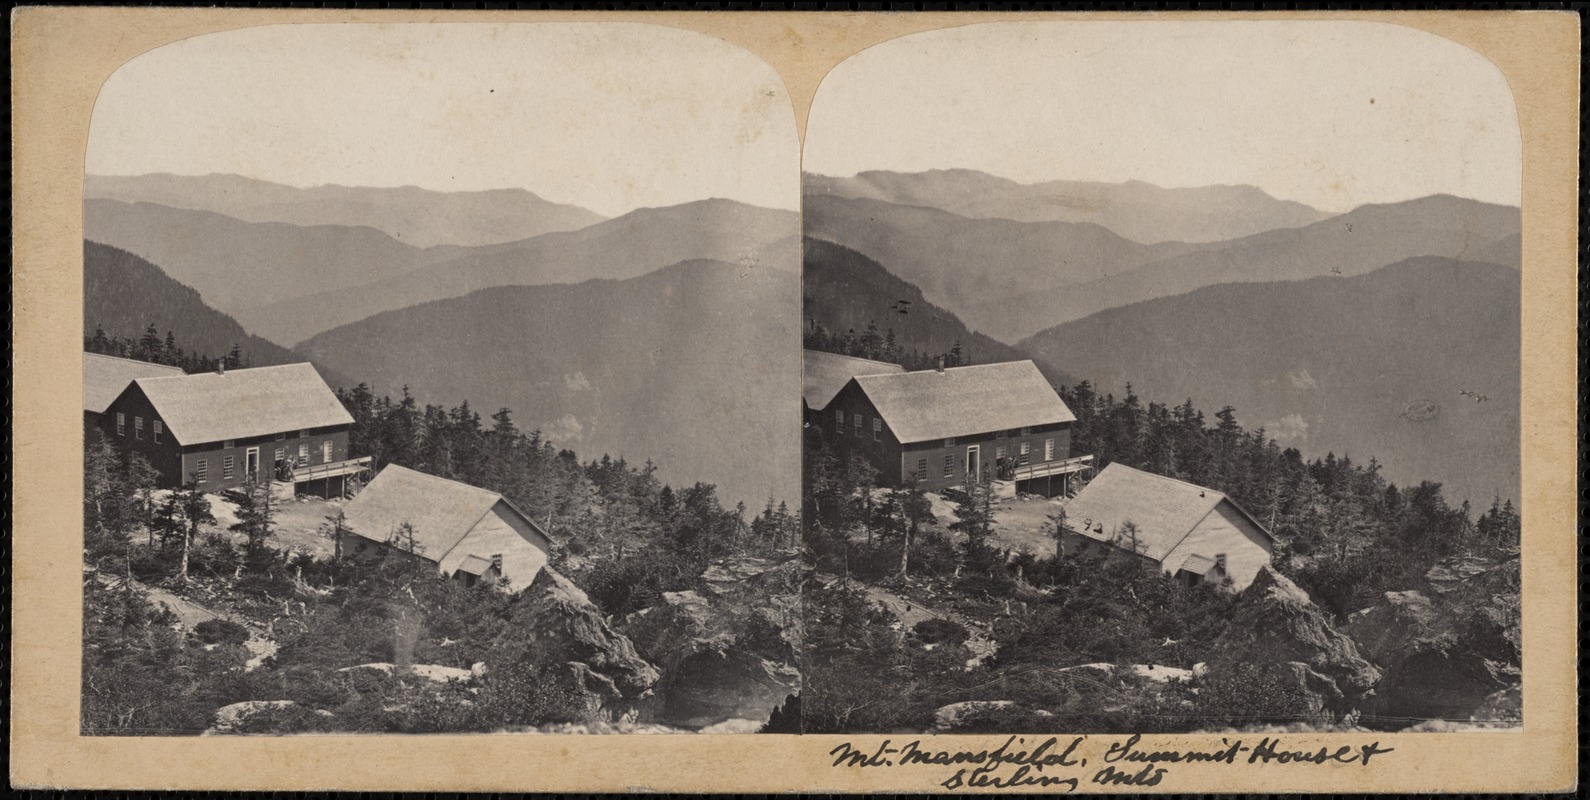 Mt. Mansfield, summit house & Sterling Mt.